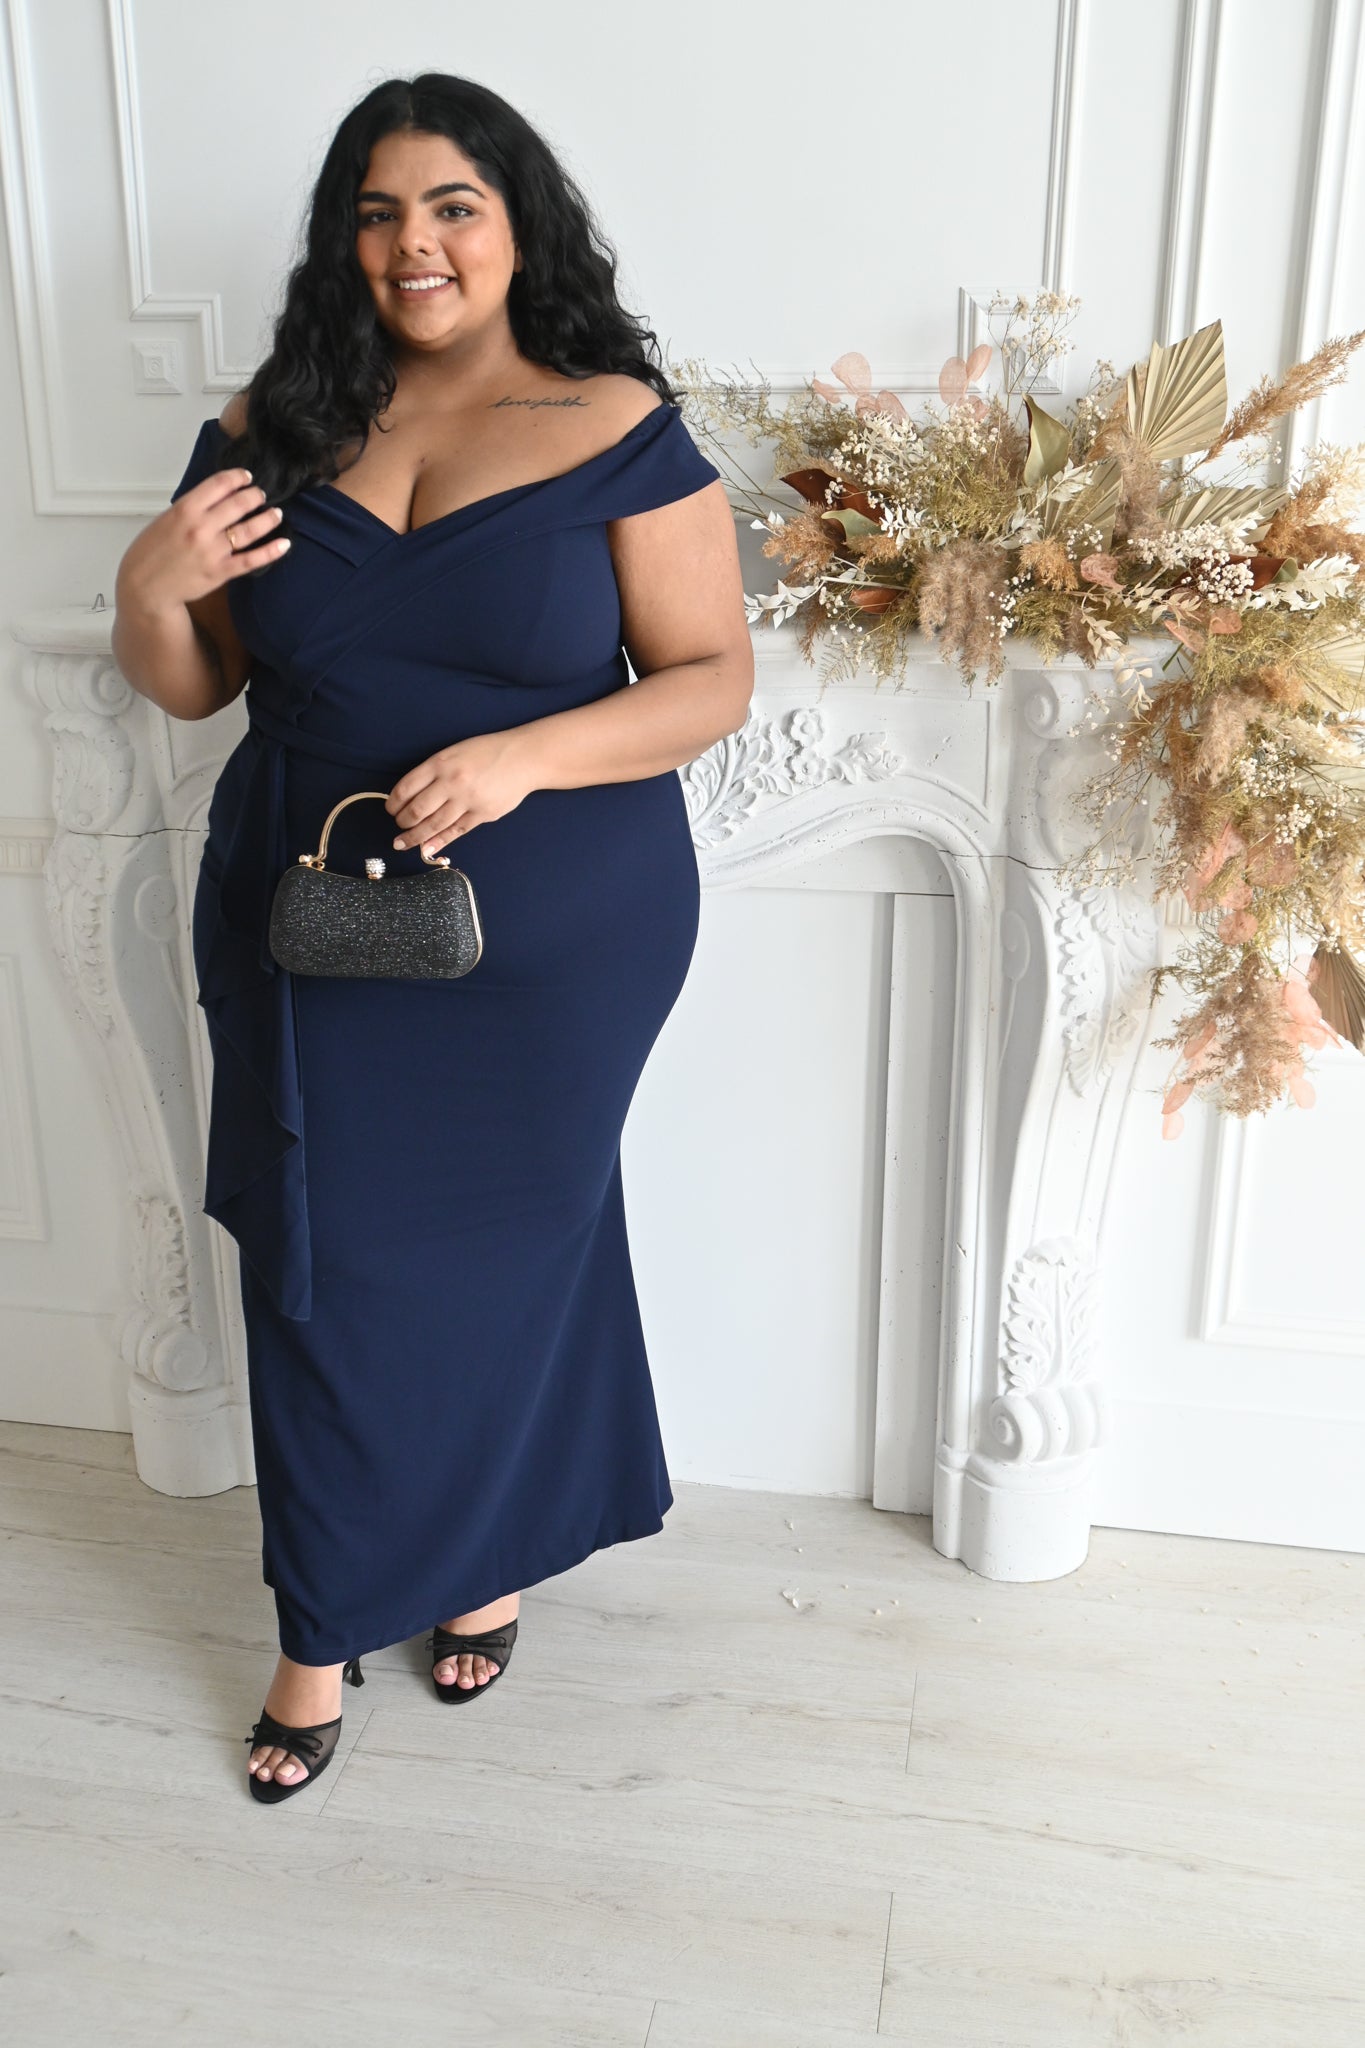 LEGiT Fashion - Our sassy style setter @vicky_vee_jonas Fitted rib  turtleneck – R159.99 (code 21630401) Pleat detail wide leg pants – R229.99  (code 21072902) Available in LEGiT stores now.